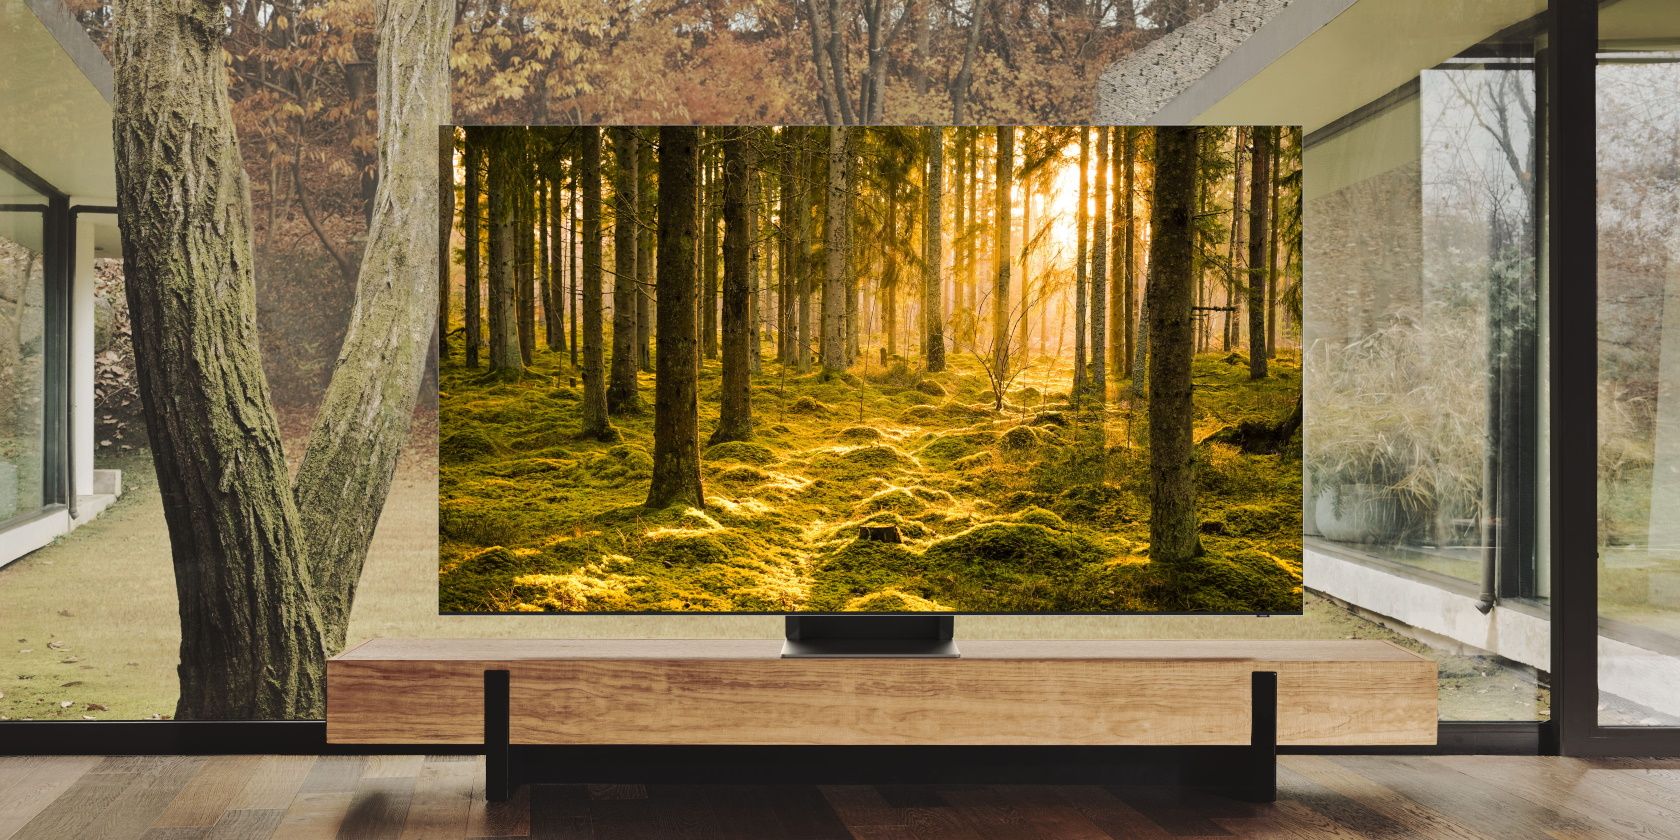 This Fantastic Samsung 65-Inch 4K Is $1,200 Cheaper for March Madness